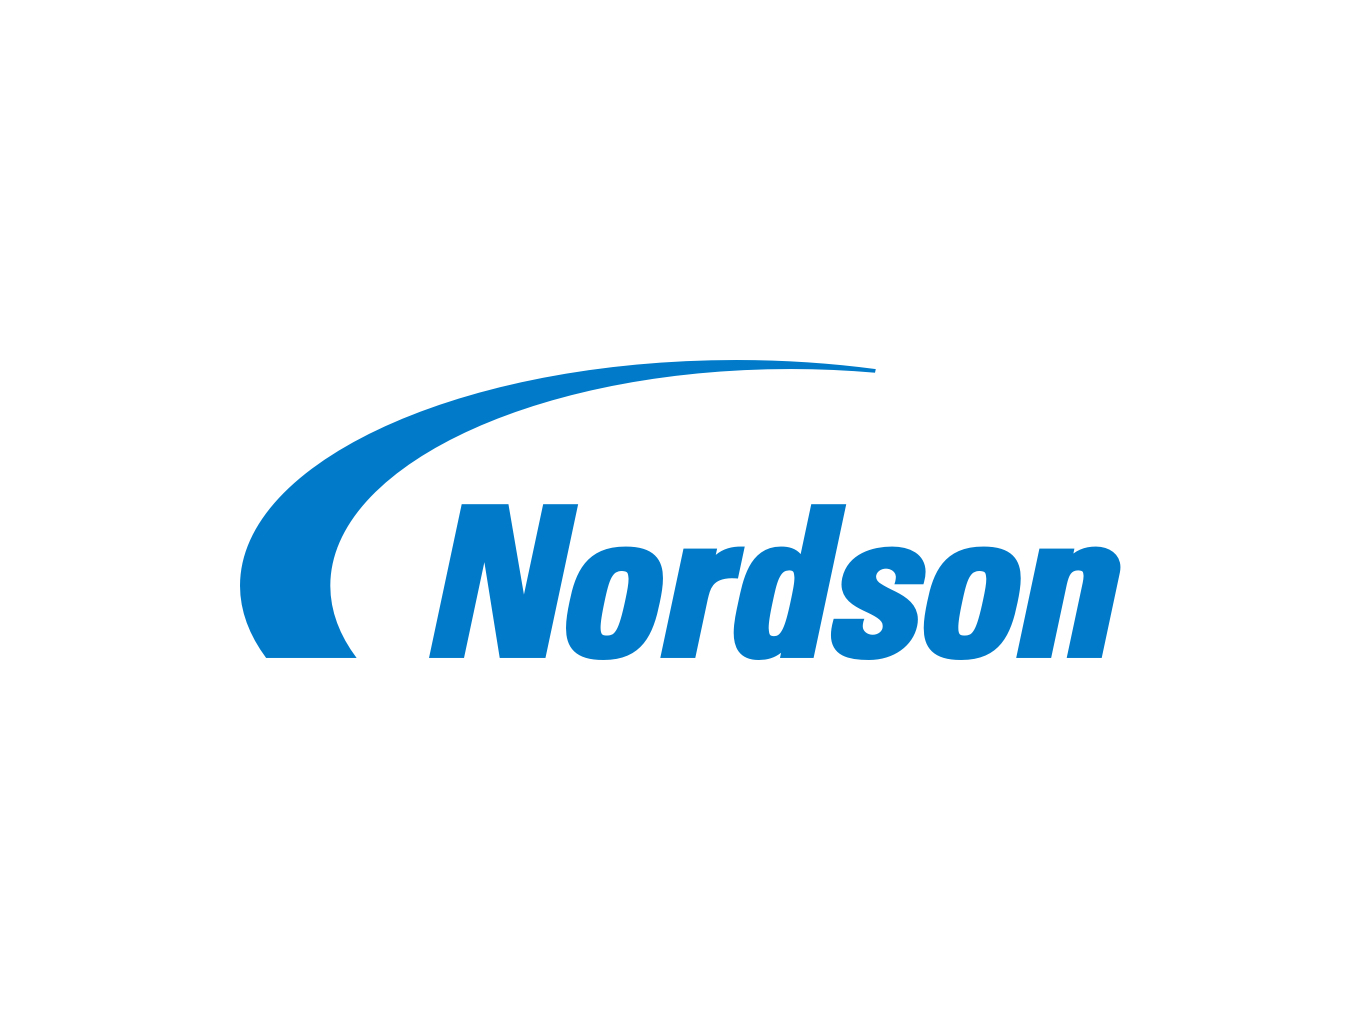 A blue and white logo of nordson